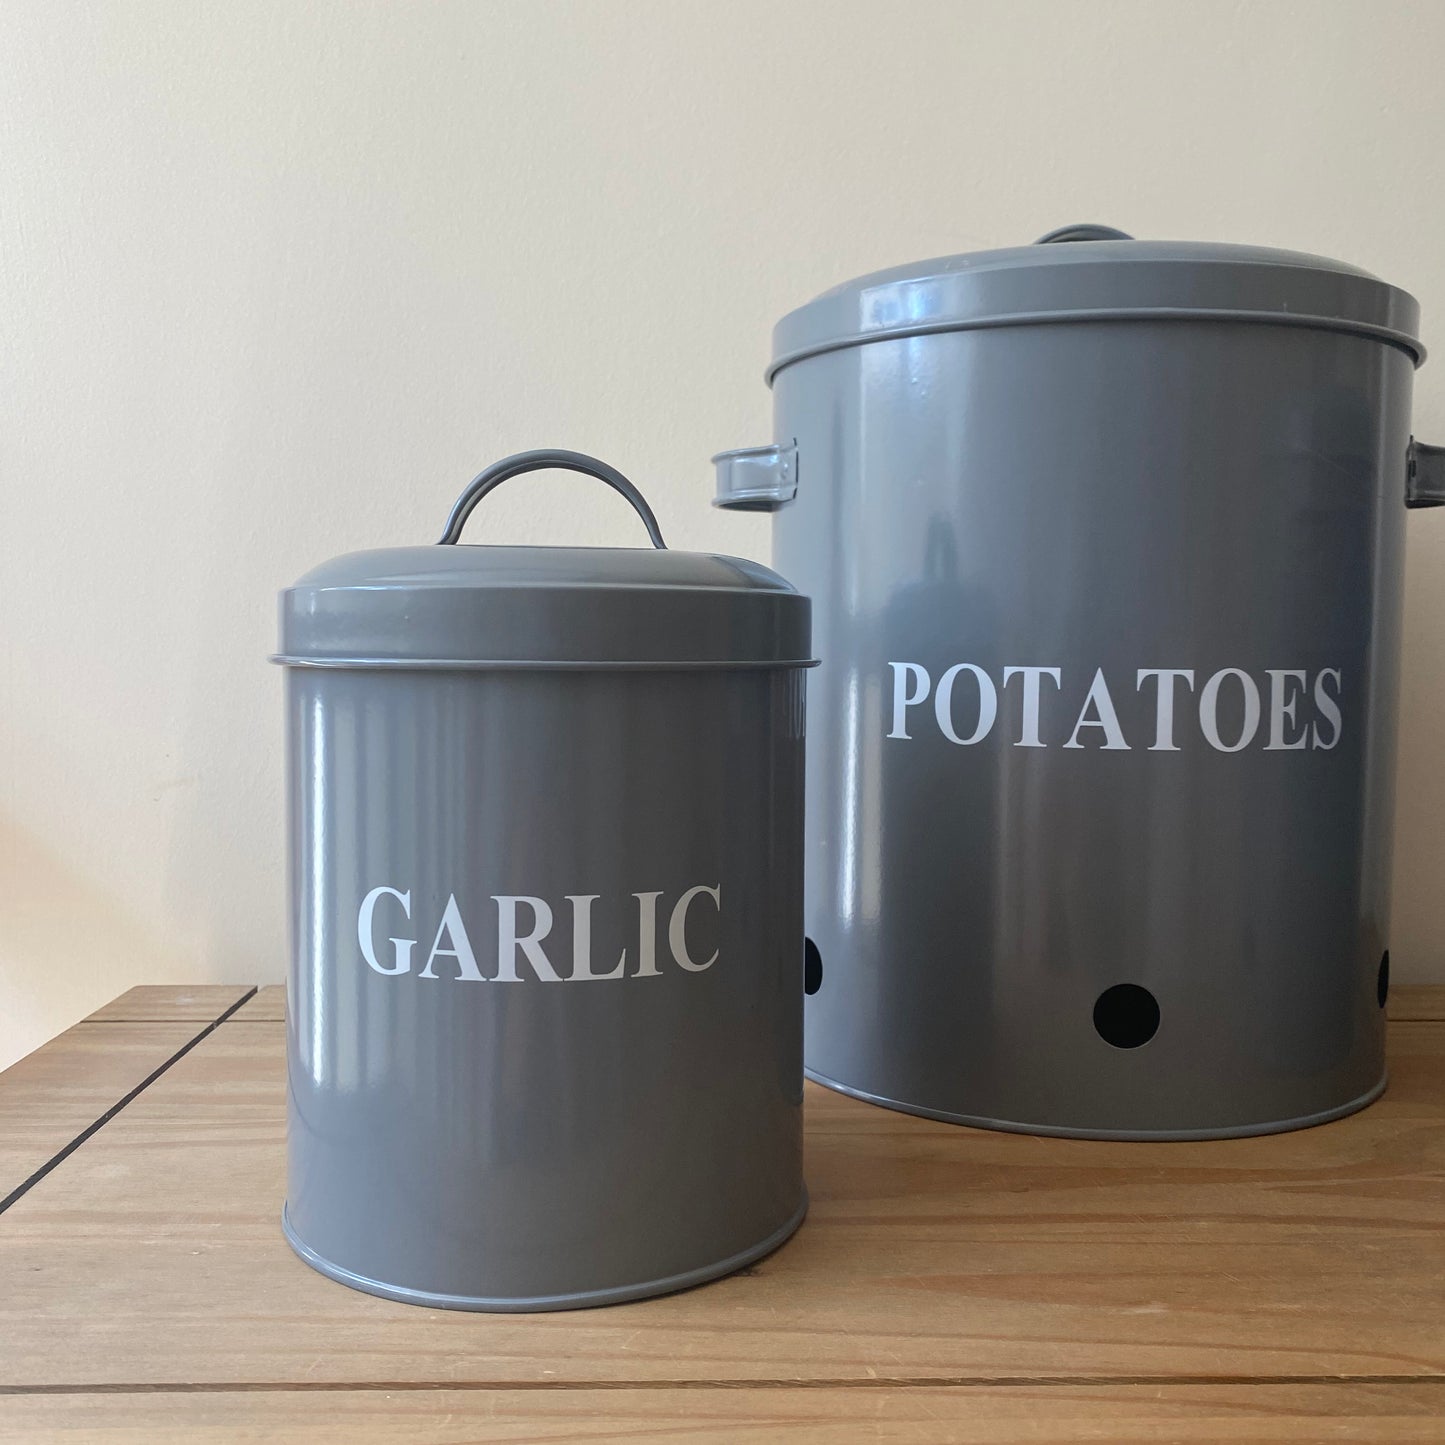 Set of 3  French Grey Kitchen Storage Tins for Potatoes, Onions and Garlic